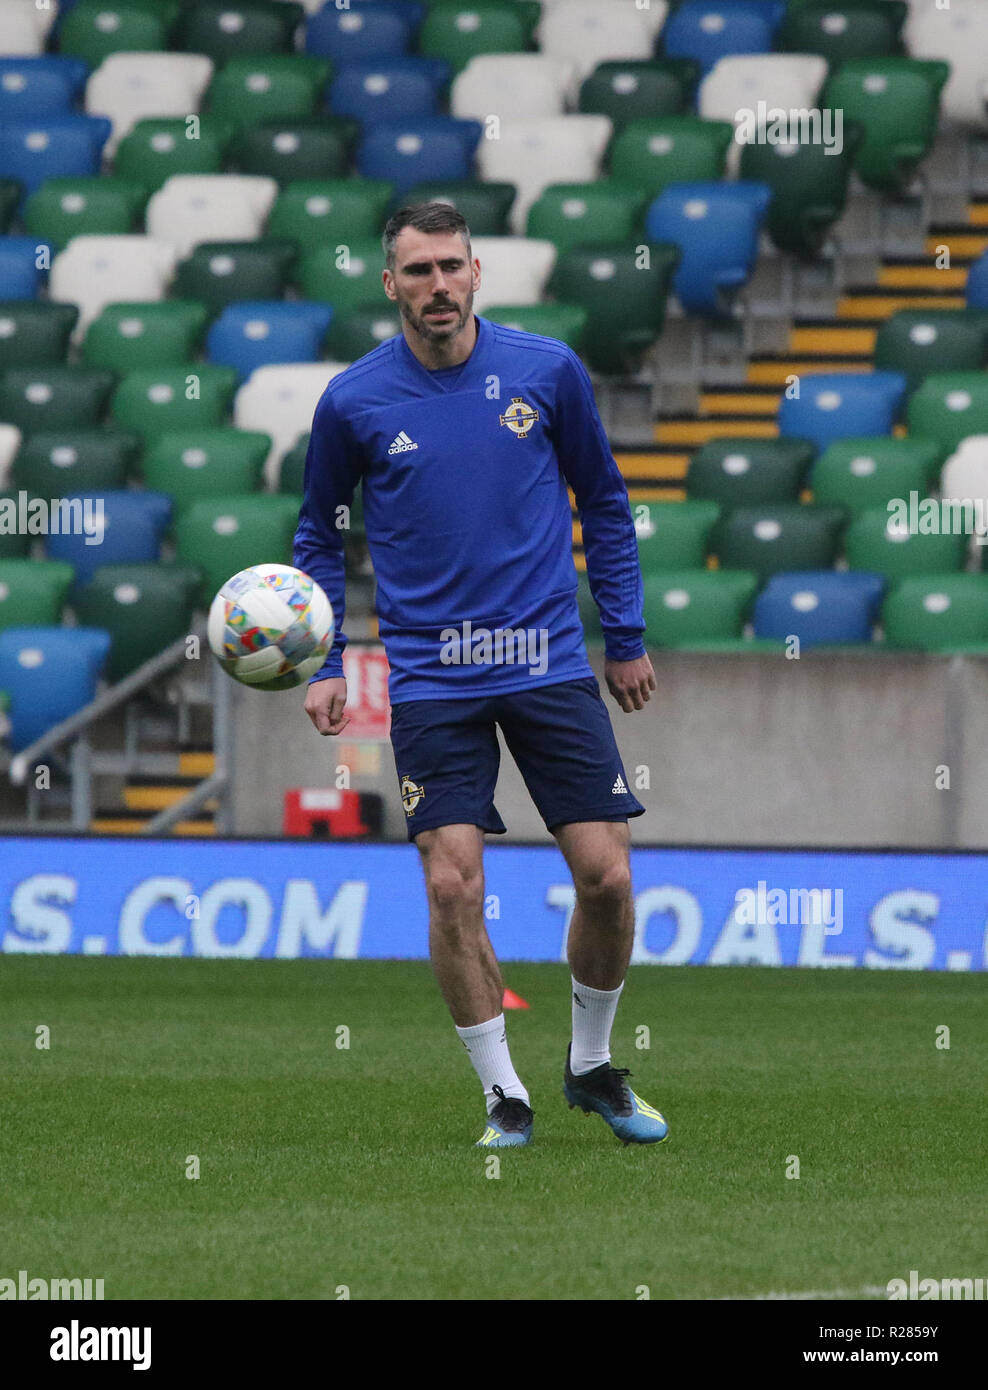 Windsor Park, Belfast, Northern Ireland.17 November 2018. Northern Ireland training in Belfast this morning ahead of their UEFA Nations League game against Austria tomorrow night in the stadium.  Michael Smith at training. Credit: David Hunter/Alamy Live News. Stock Photo